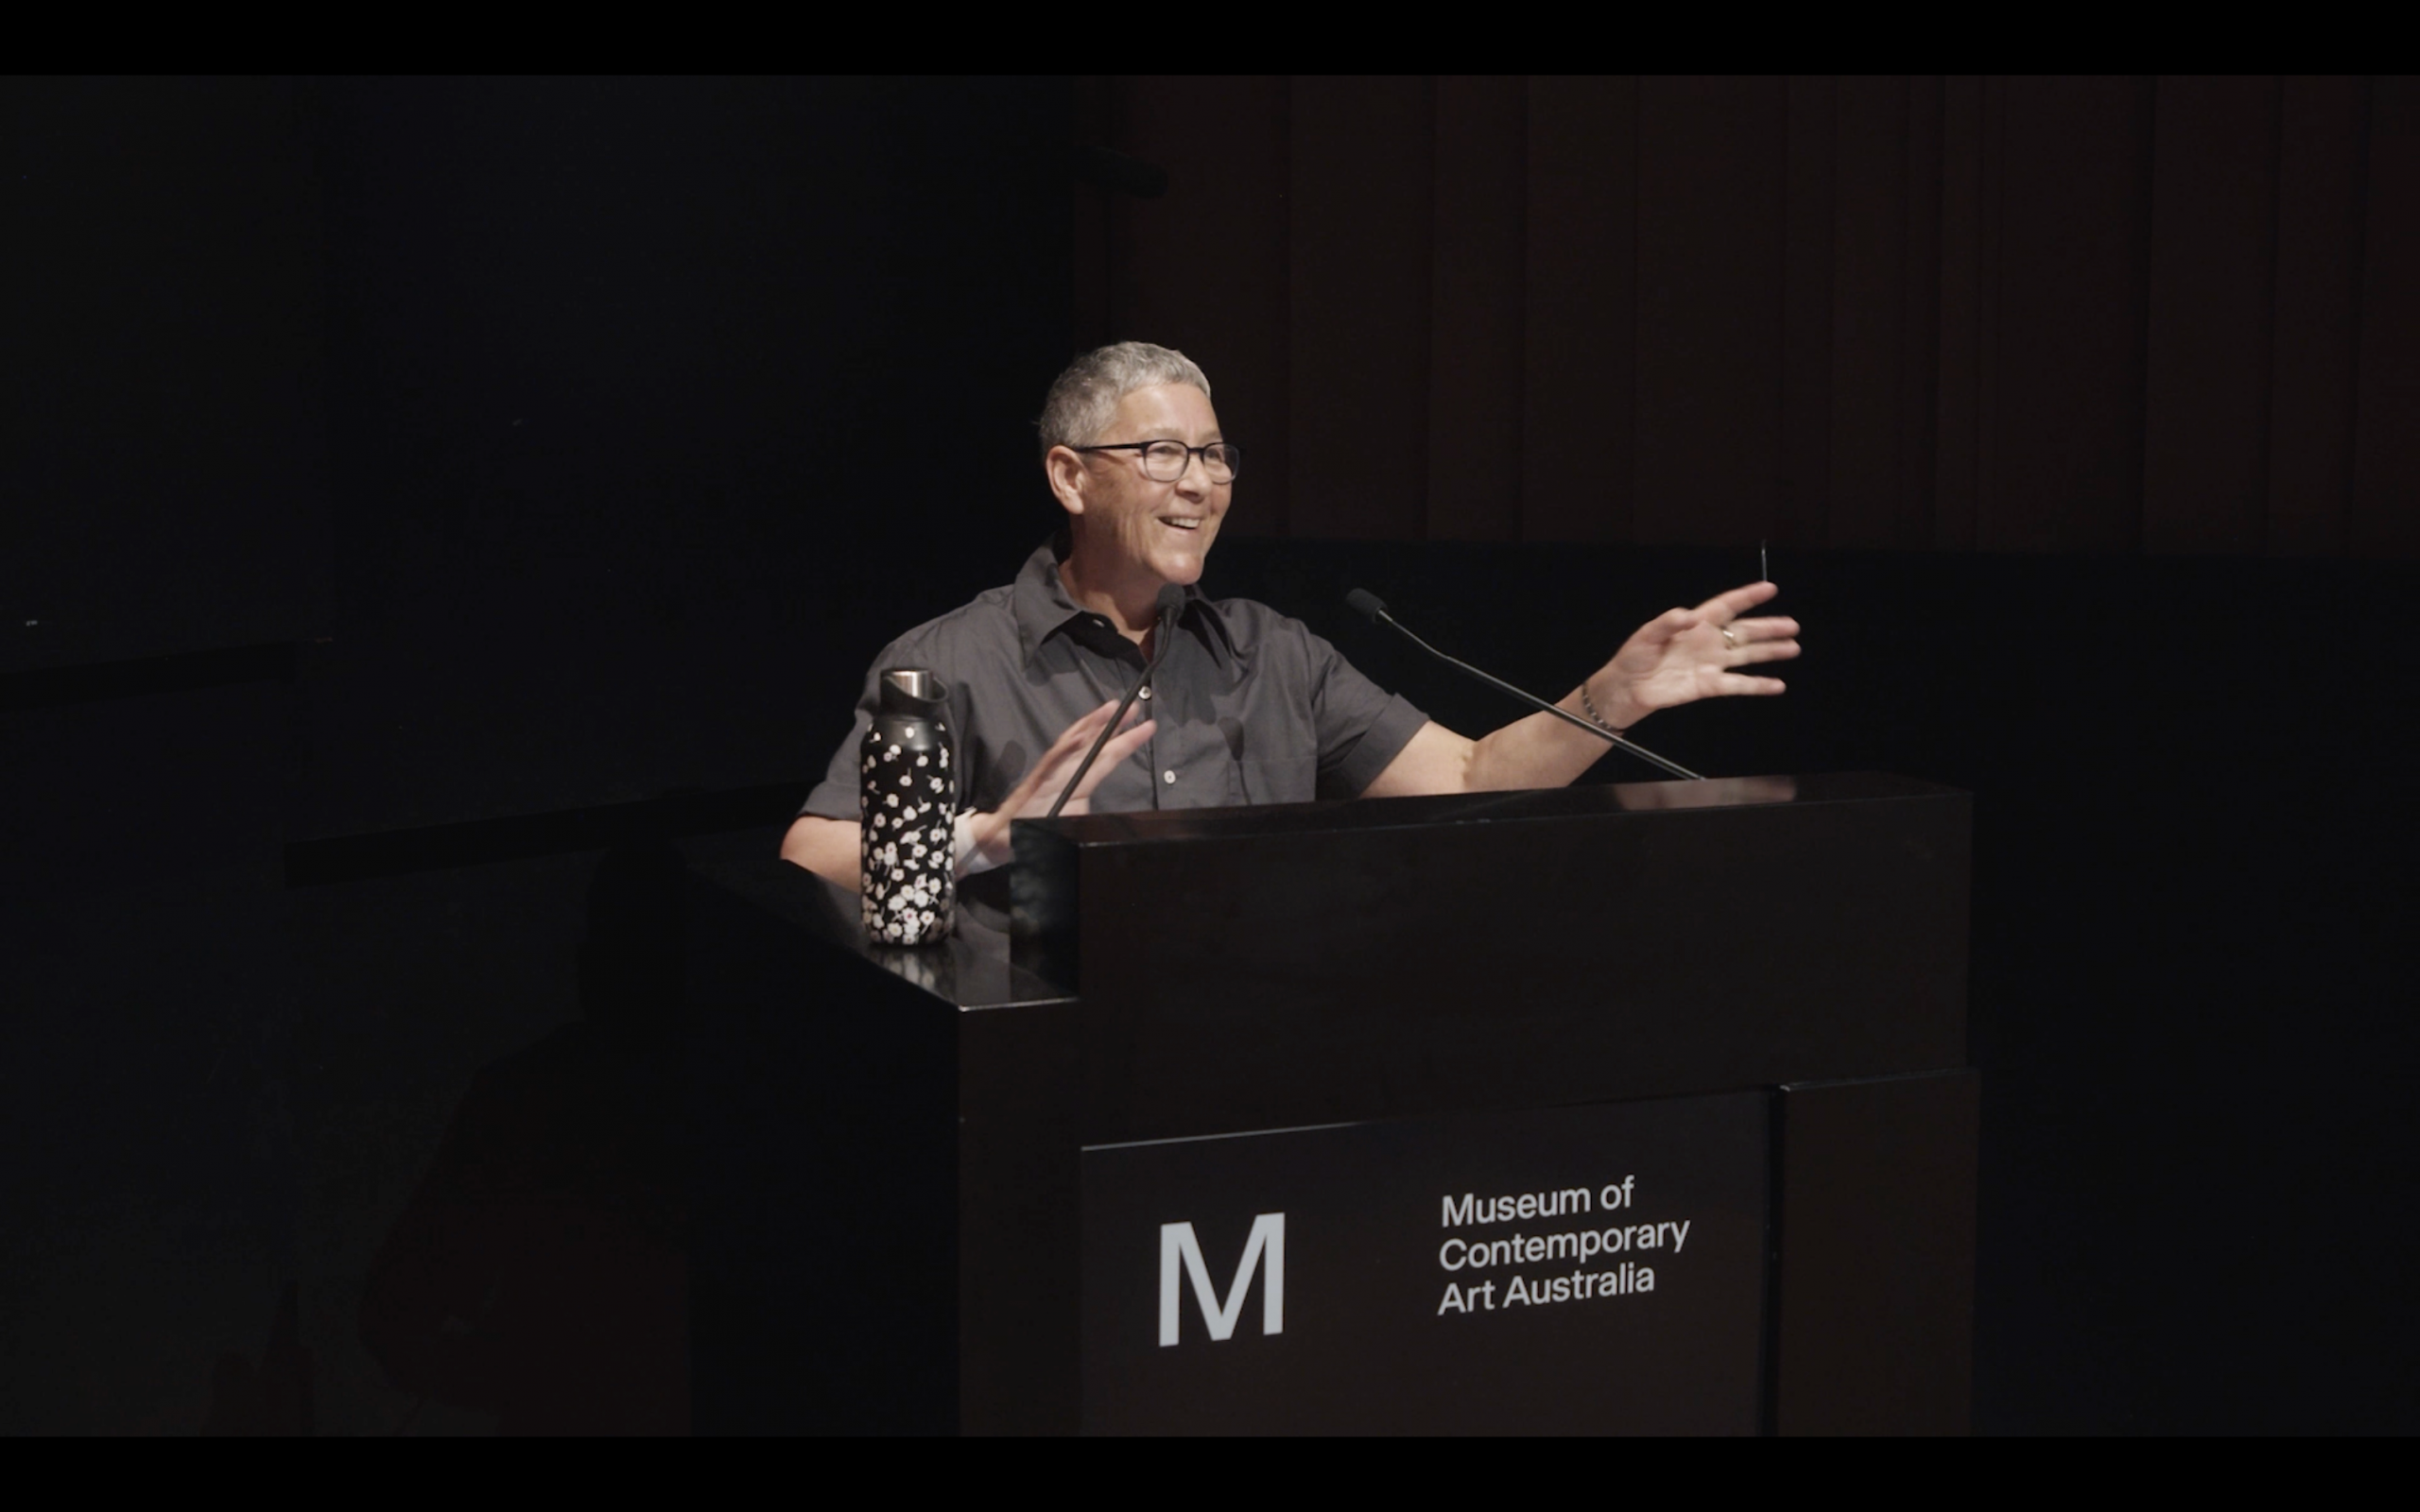 Jack Halberstam at a lectern delivering a lecture. He is smiling and gesturing with his hands.